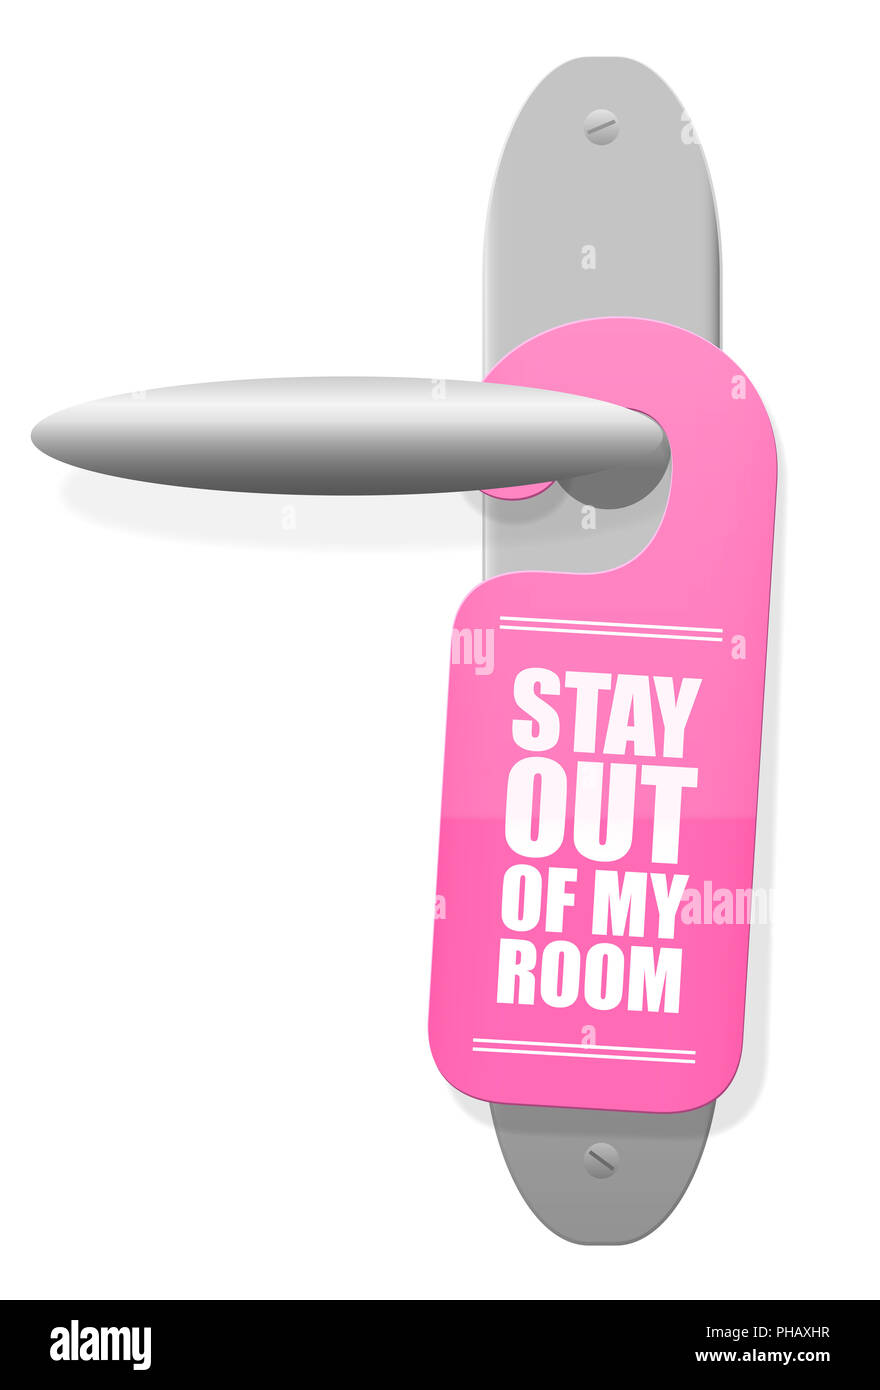 STAY OUT OF MY ROOM - pink sign hanging on door handle of a girls room - illustration on white background. Stock Photo